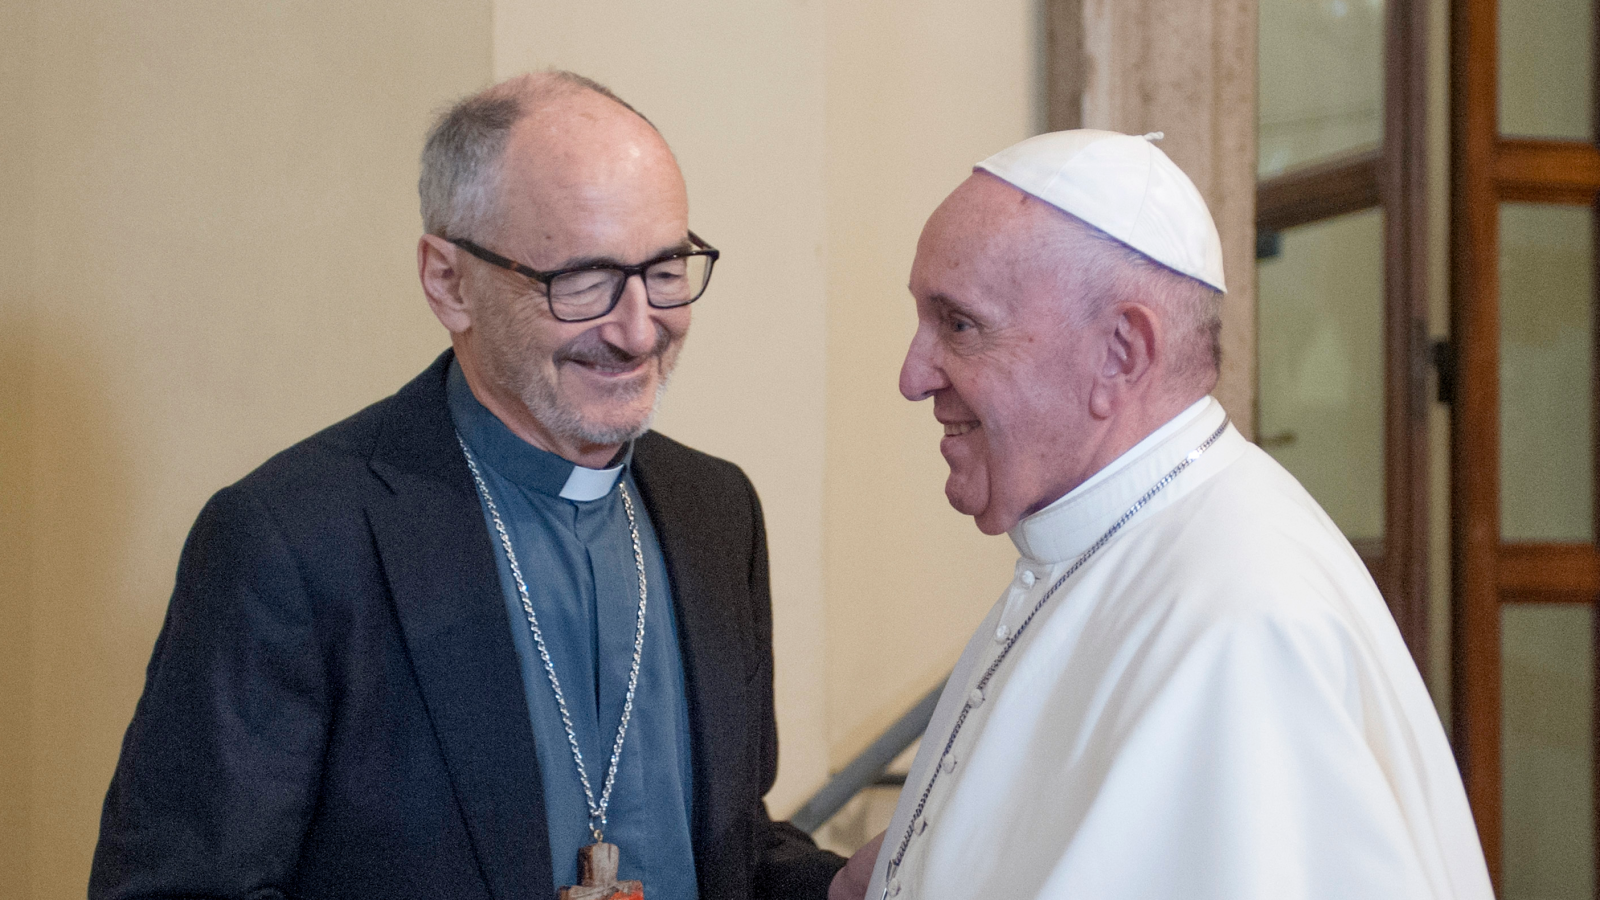 Cardinal Michael Czerny, S.J. on left shaking hands with Pope Francis on right